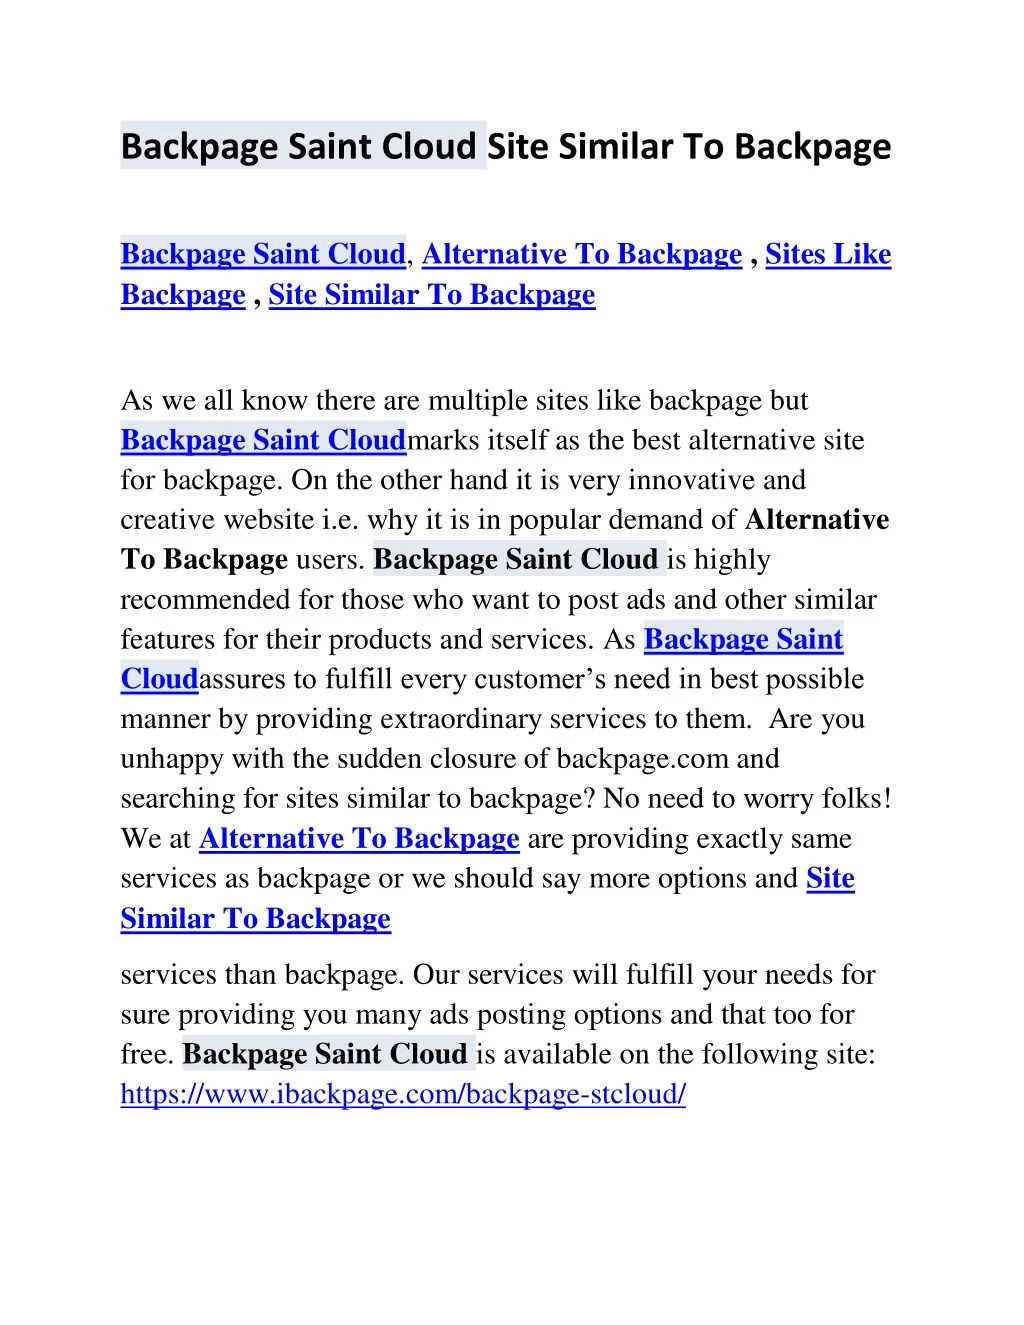 backpage saint cloud site similar to backpage n.